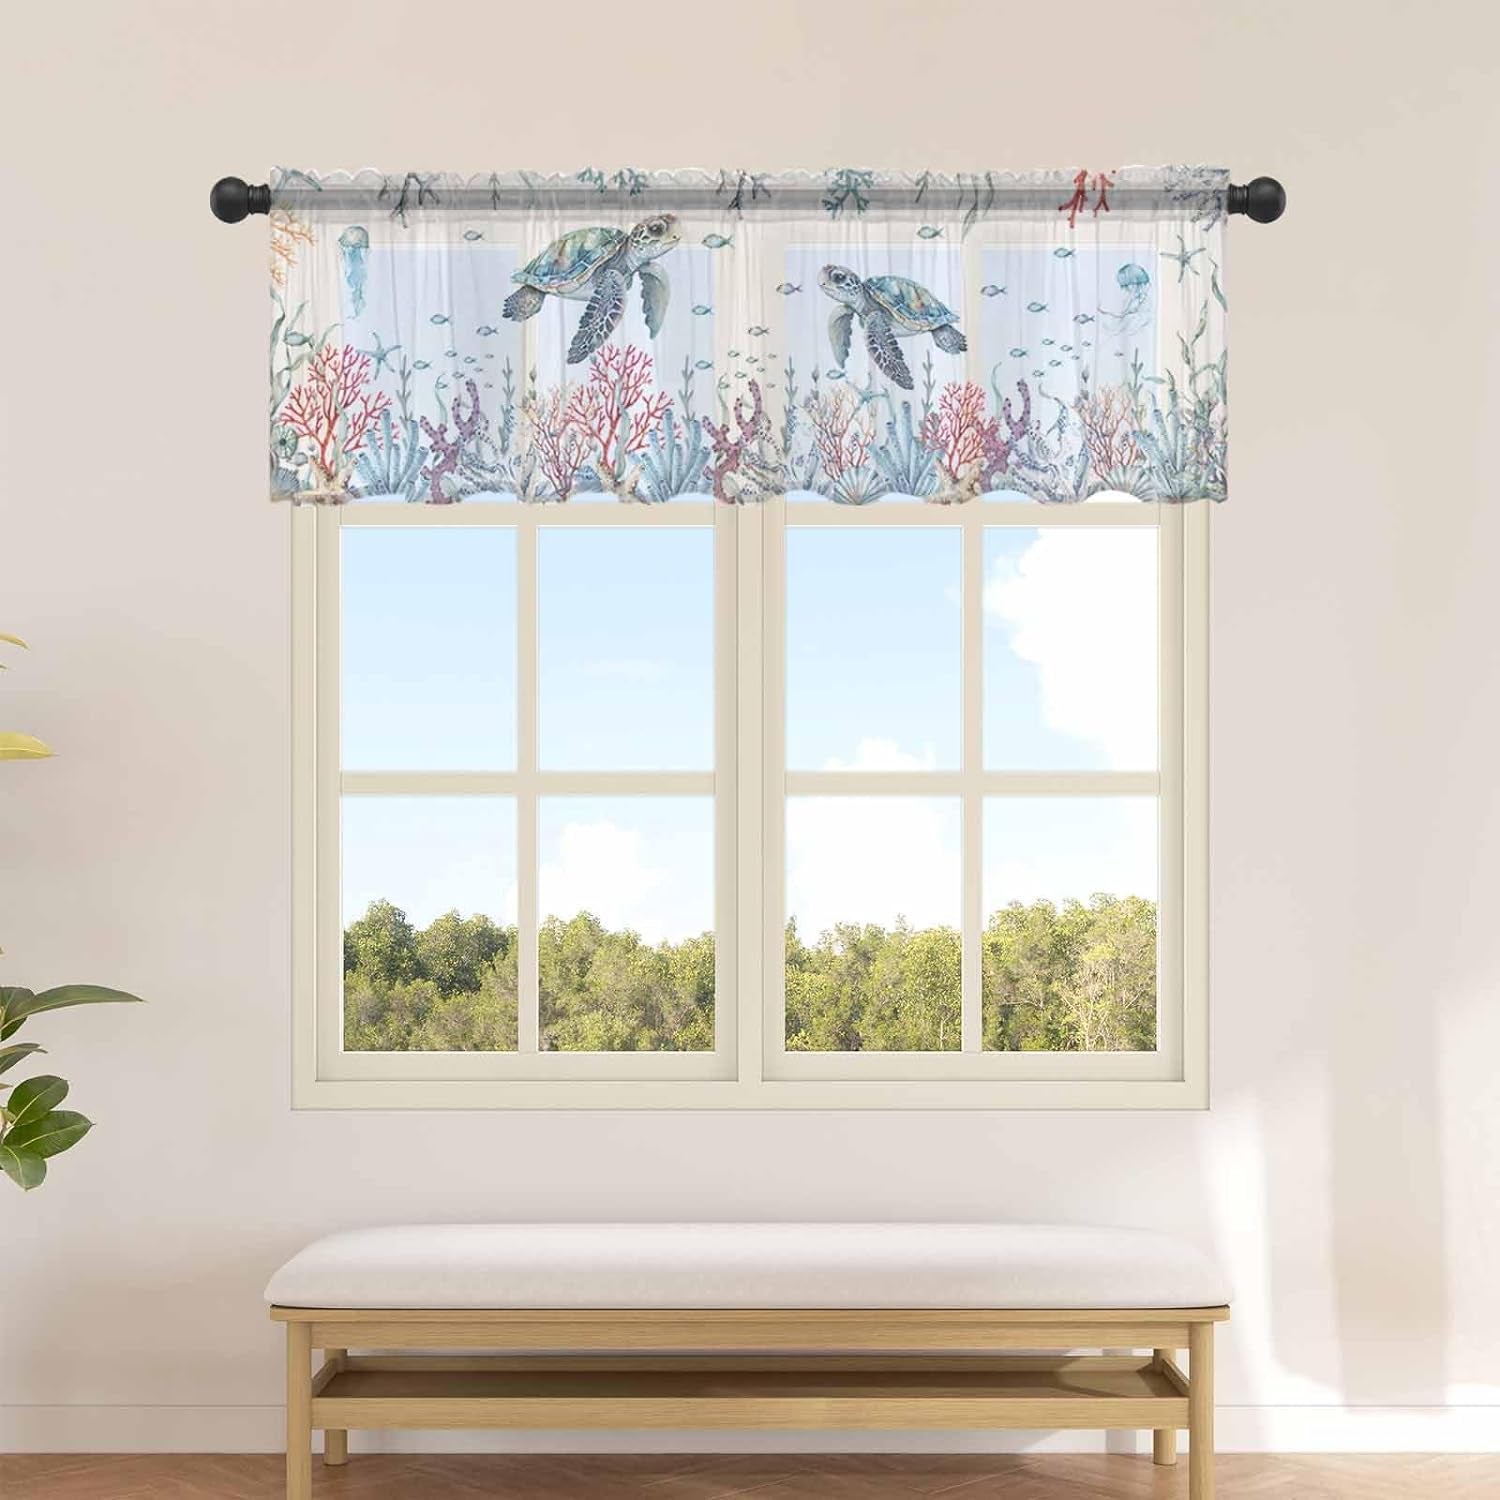 Oecan Sea Turtle Valance Curtains for Kitchen/Living Room/Bathroom/Bedroom Window,Rod Pocket Small Topper Half Short Window Curtains Voile Sheer Scarf, Coral Seaweed Blue White Watercolor 42"X12"